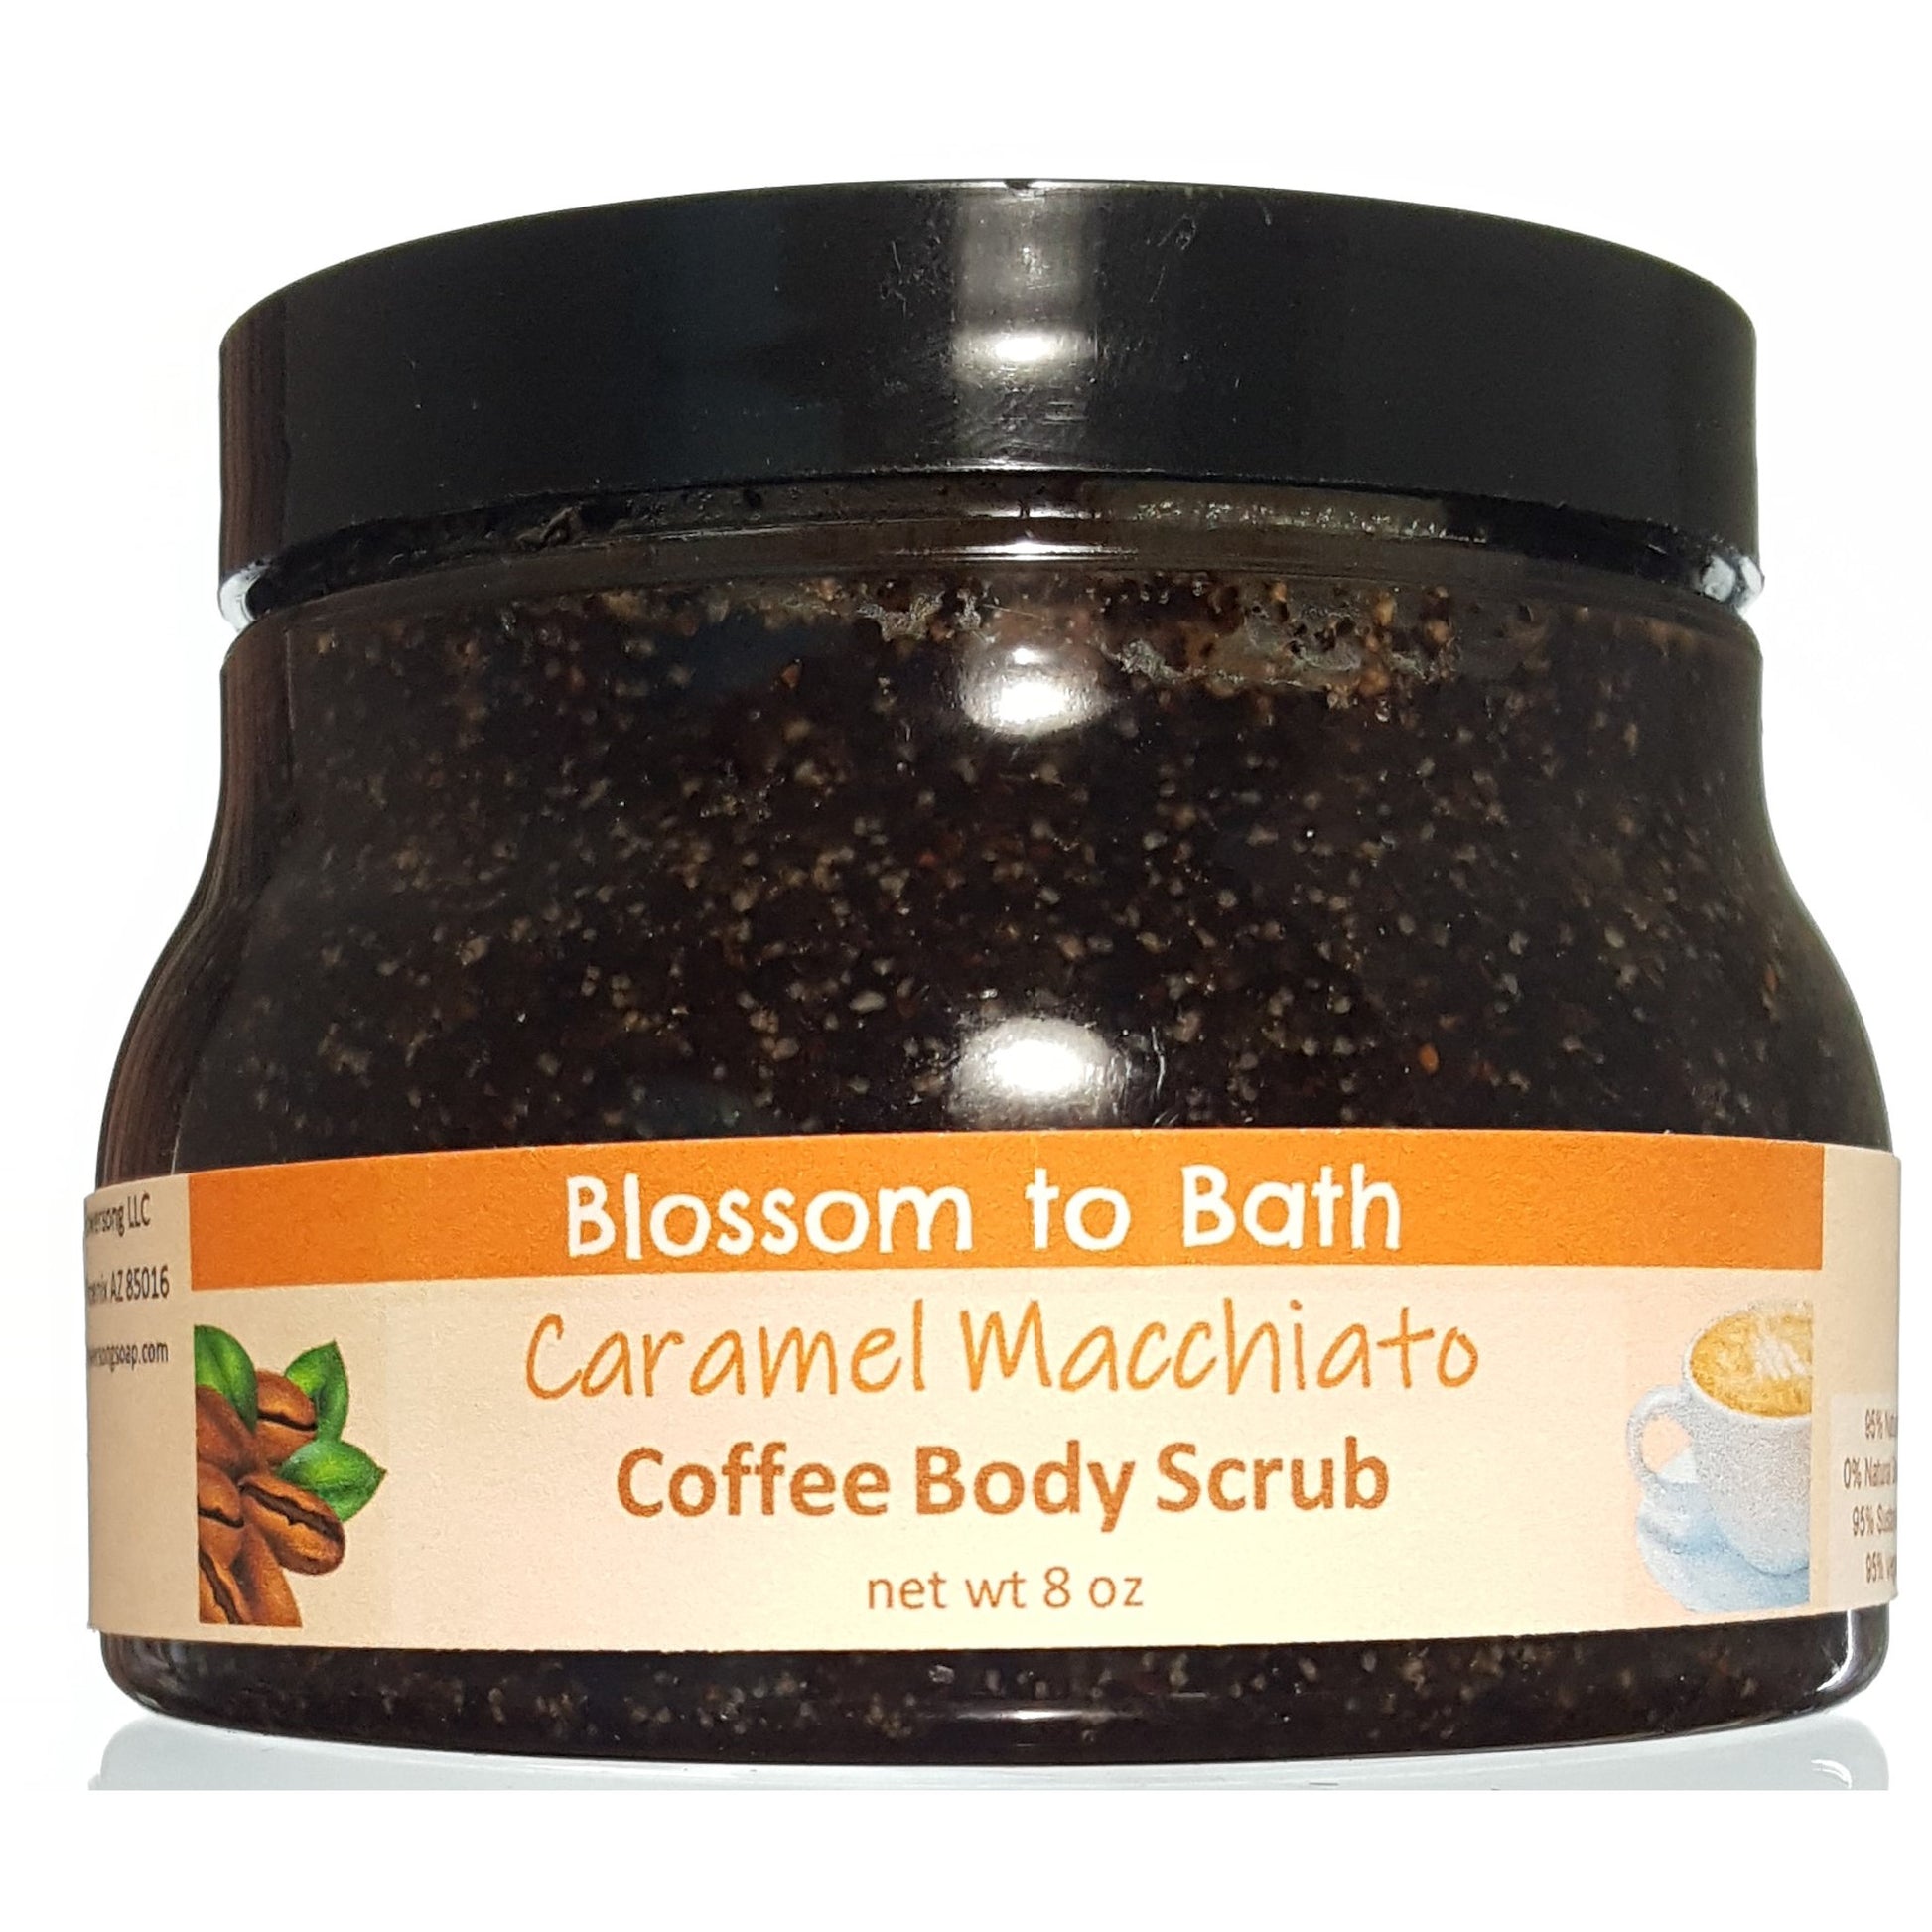 Buy Blossom to Bath Caramel Macchiato Coffee Body Scrub from Flowersong Soap Studio.  Polish skin to a refreshed natural glow while enjoying your favorite mouth-watering gourmet coffee aroma  Luscious vanilla and warm rich caramel - a gourmet coffee experience with sweet caramel in a bed of vibrant coffee;